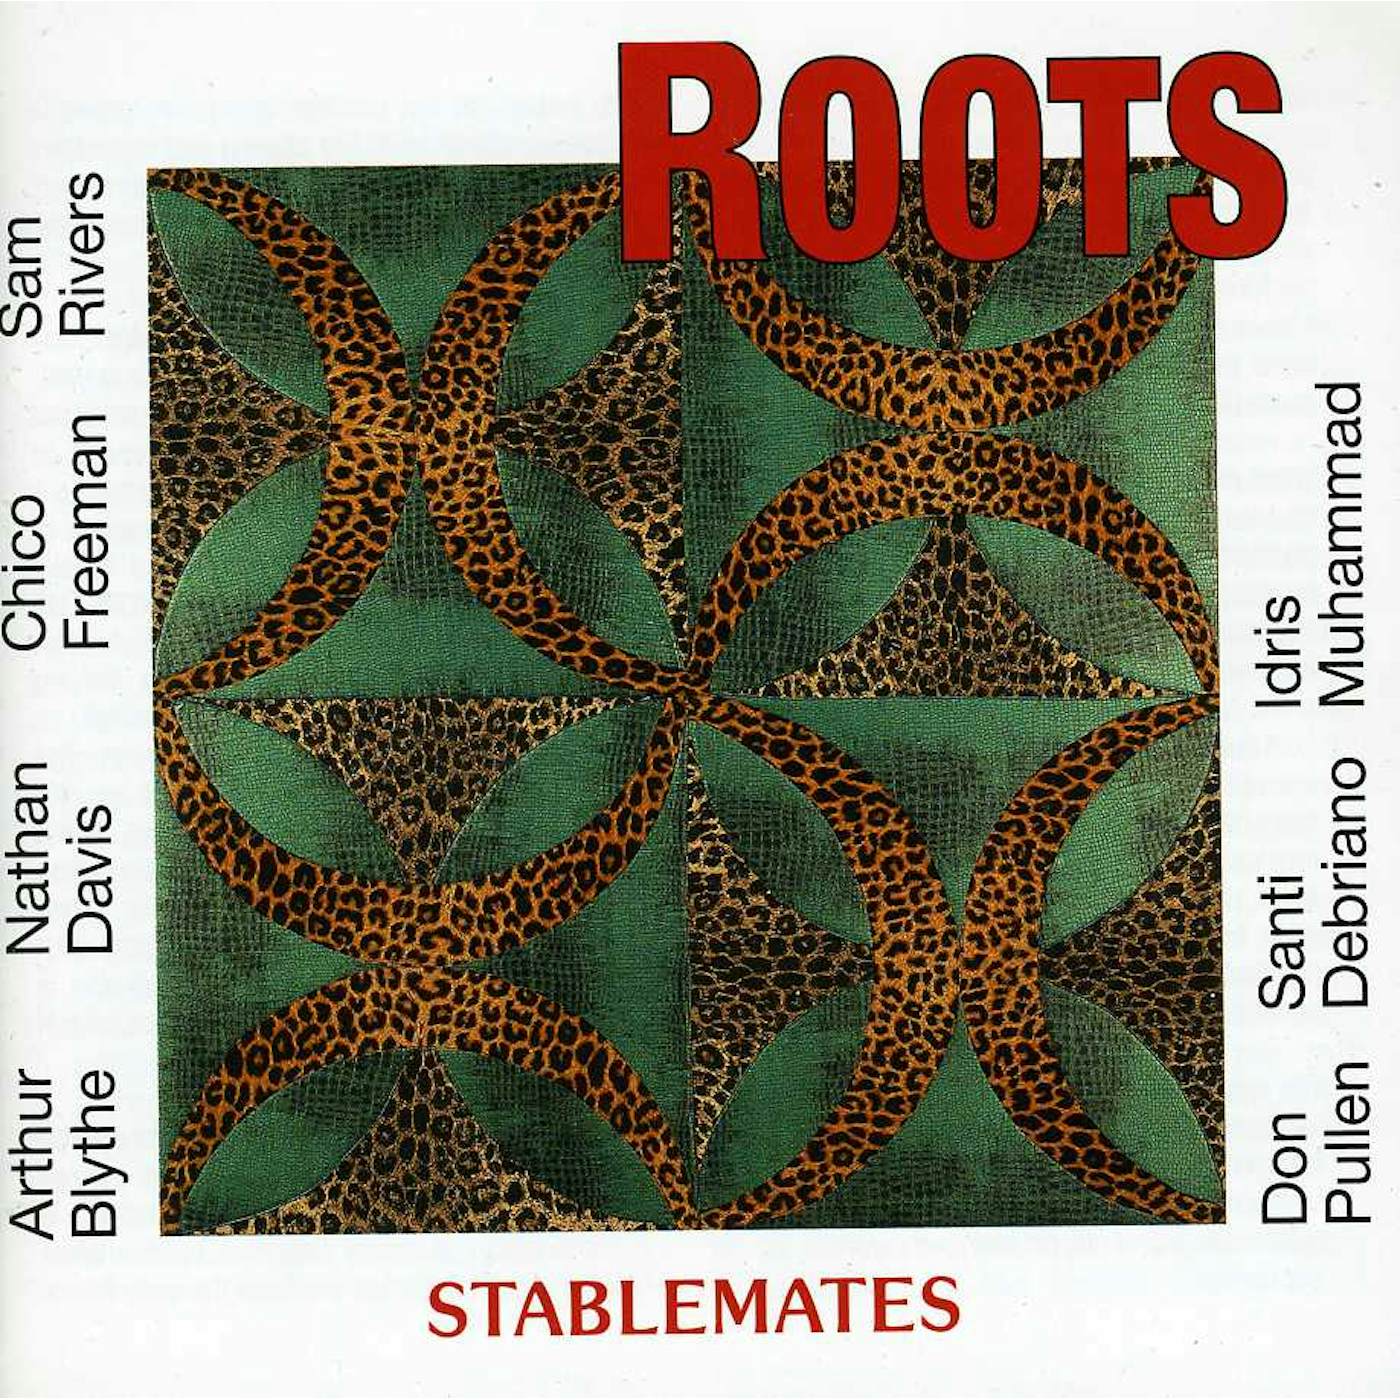 The Roots STABLEMATES CD